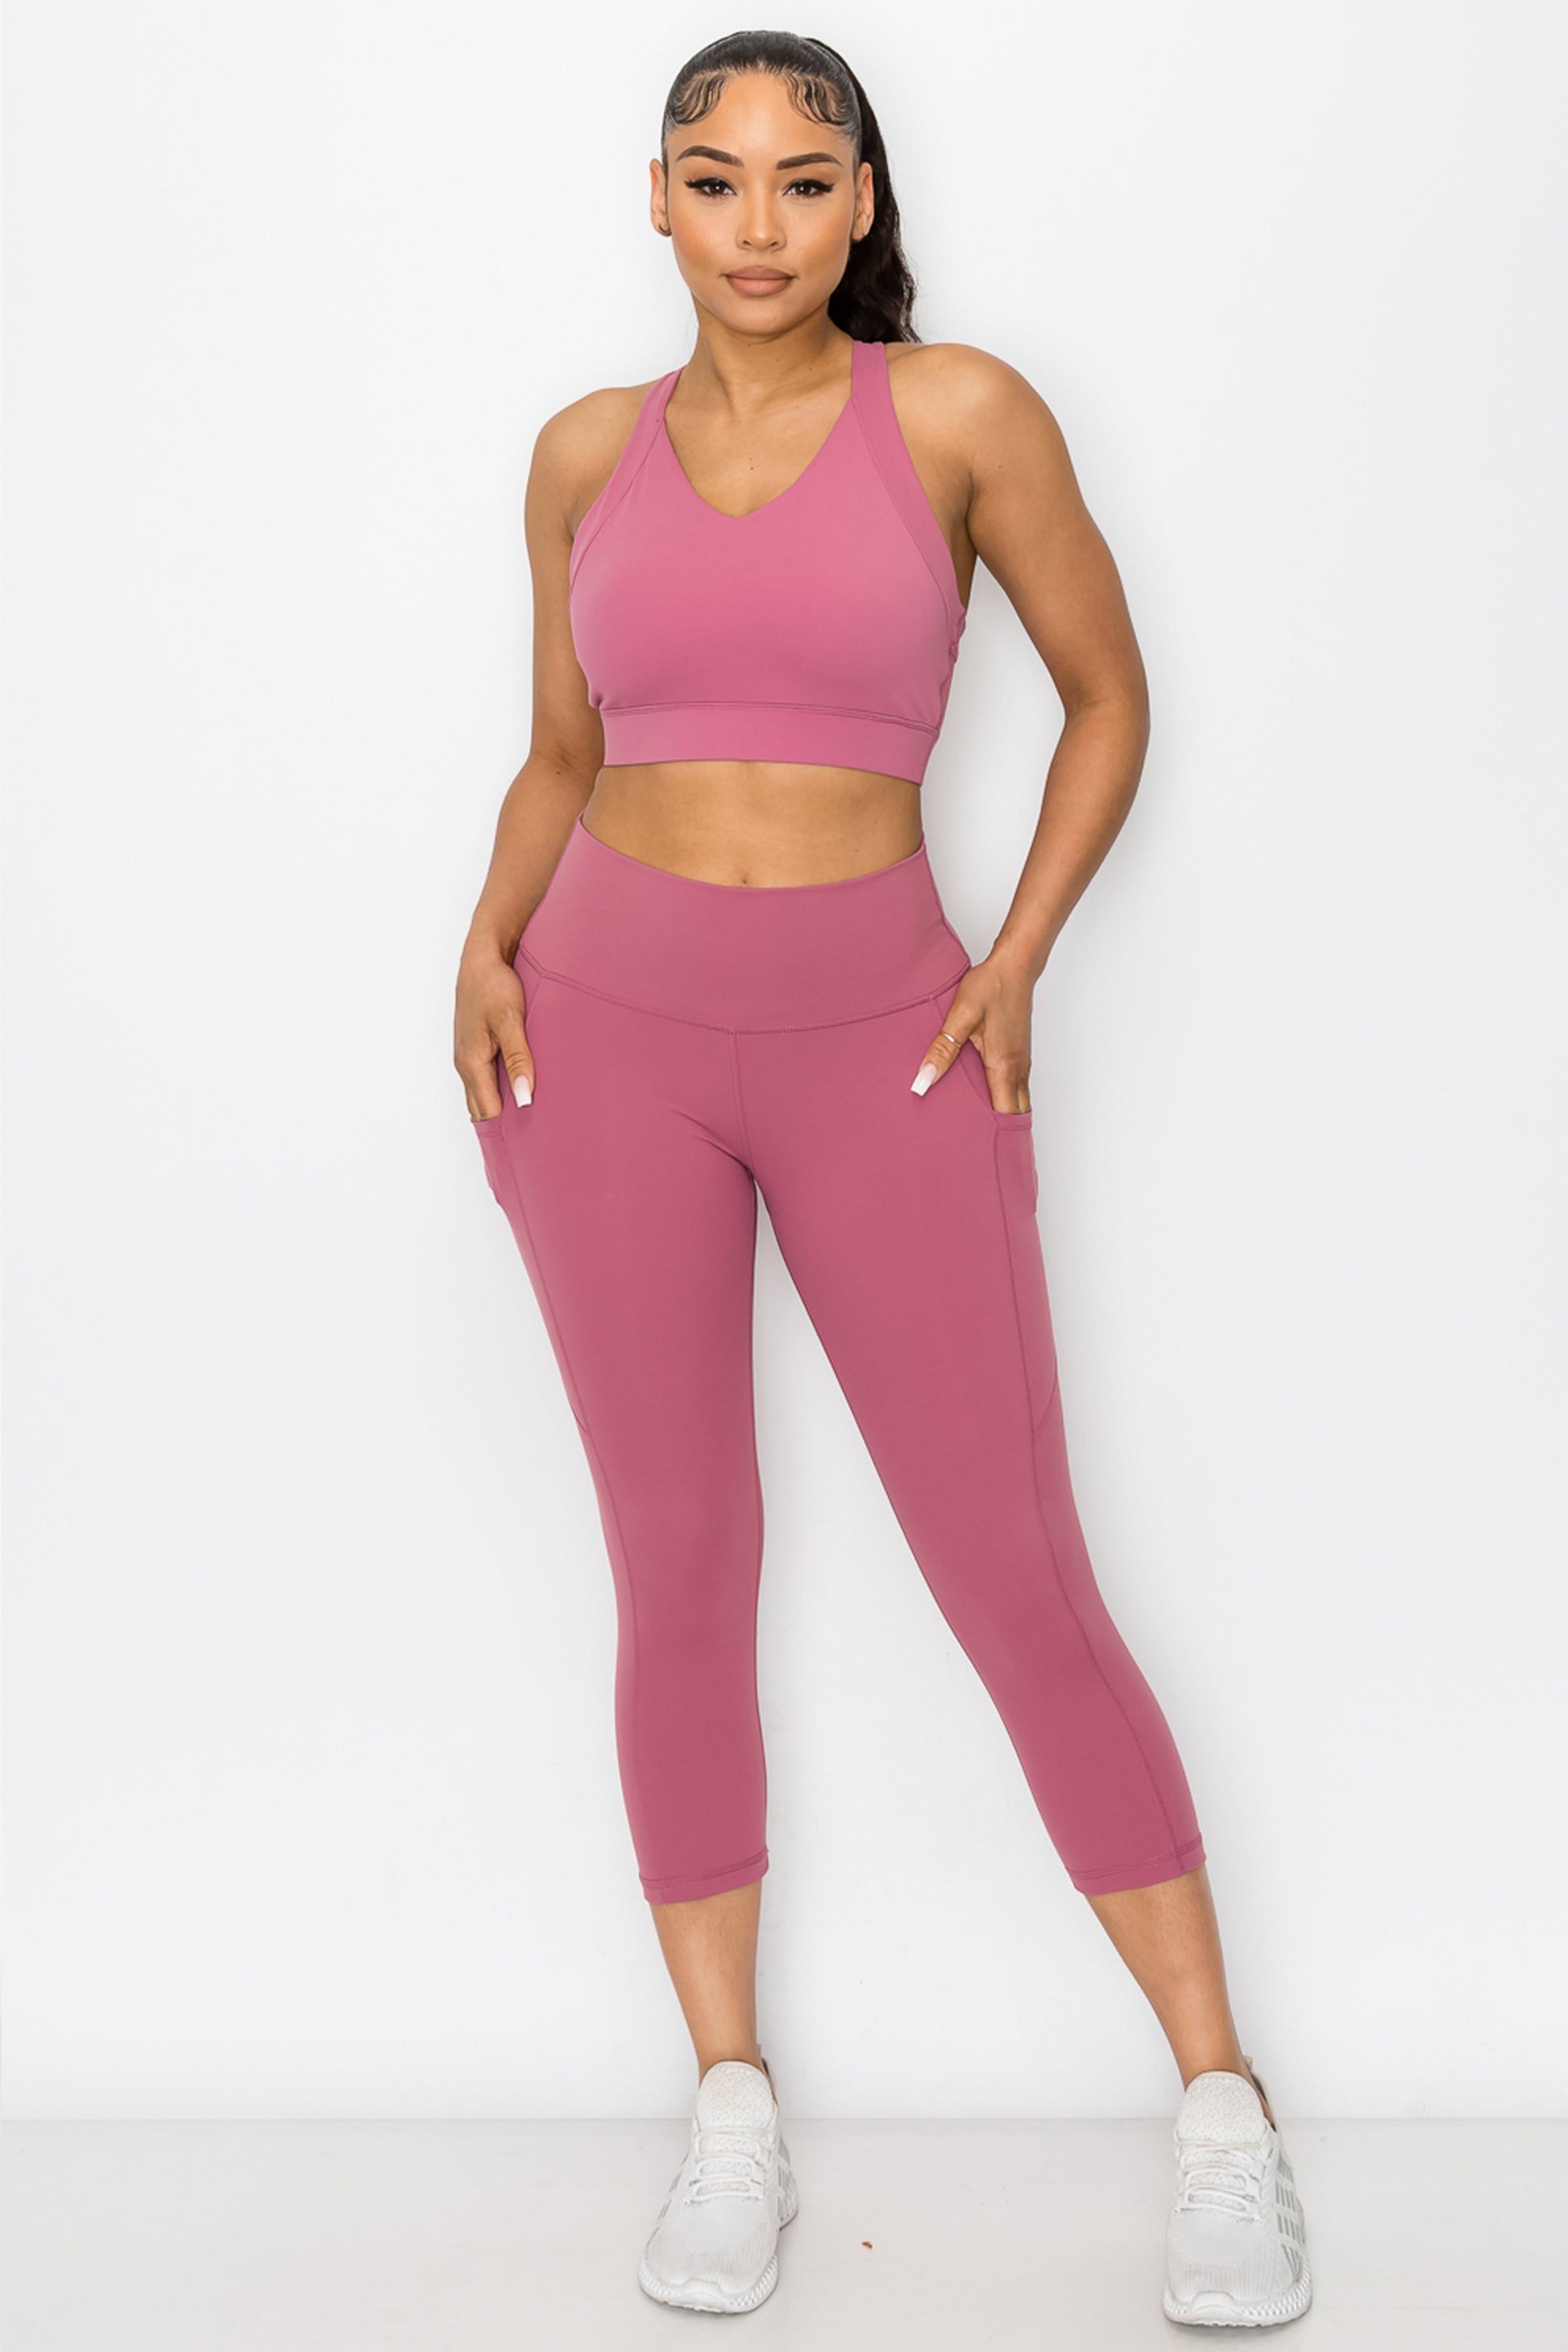 Buttery Soft High Waisted Capri Leggings with Pockets - Dusty Rose